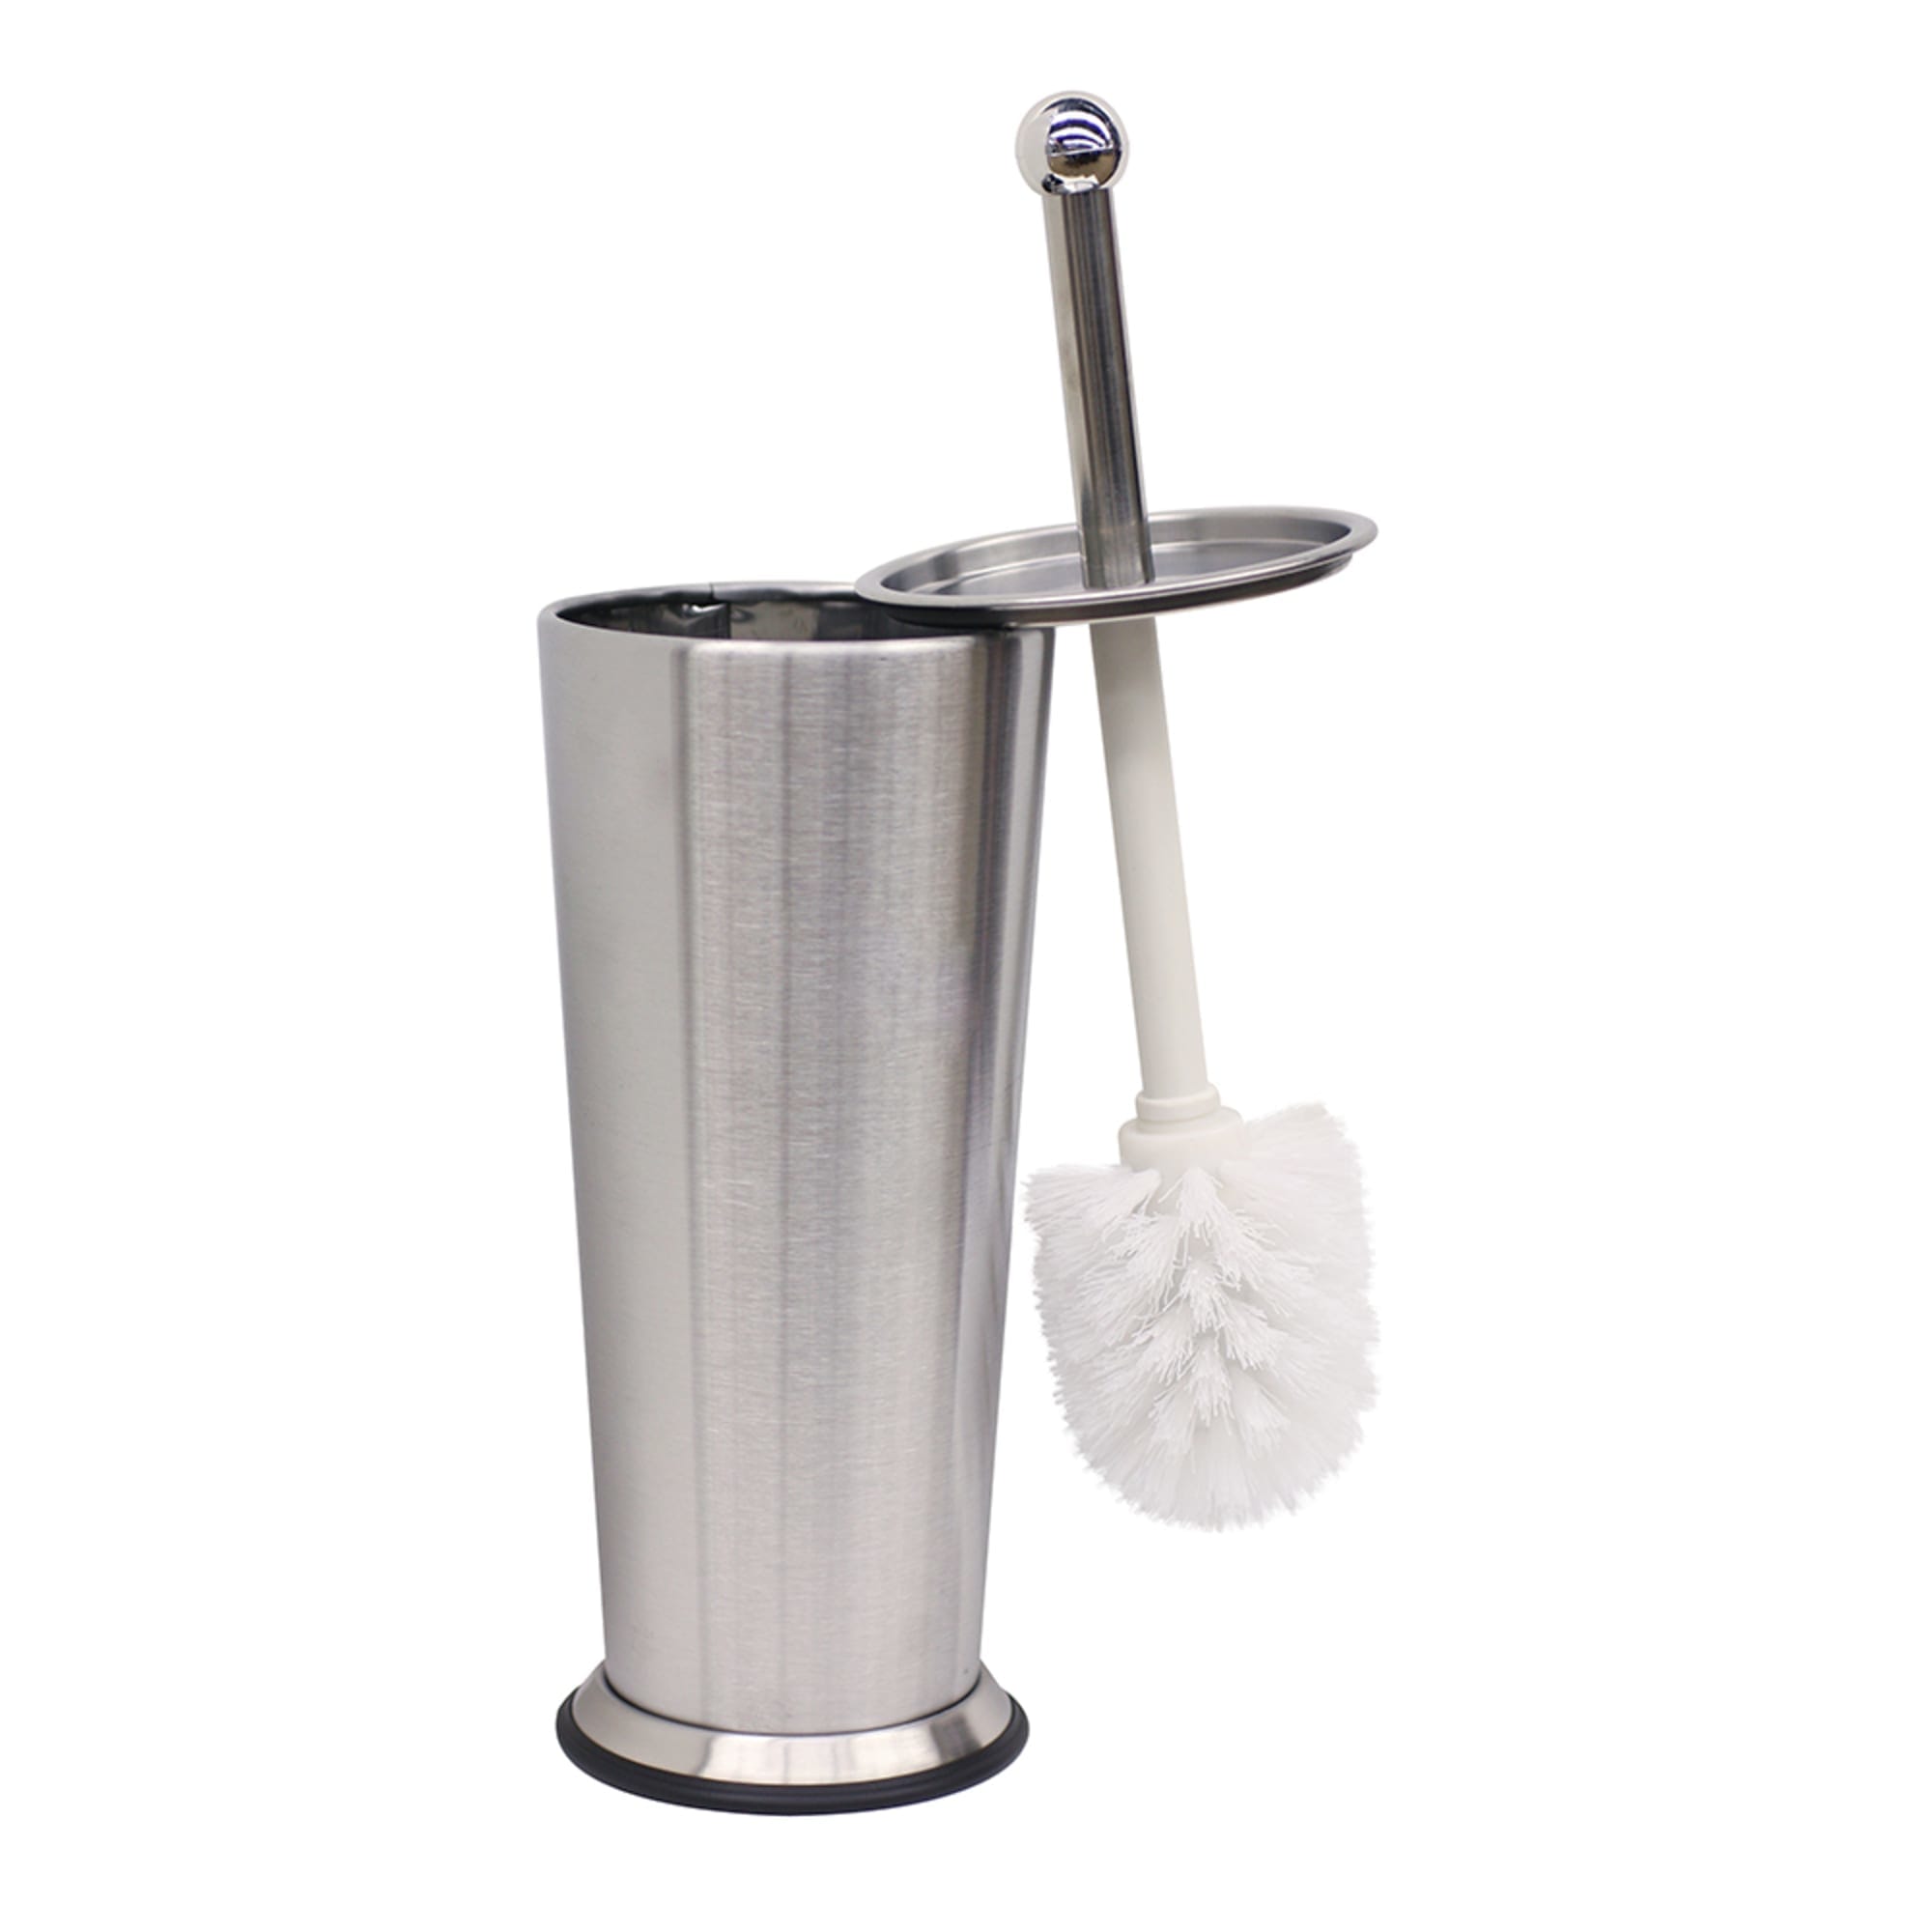 Home Basics Stainless Steel Tapered Toilet Brush, Silver $8.00 EACH, CASE PACK OF 12